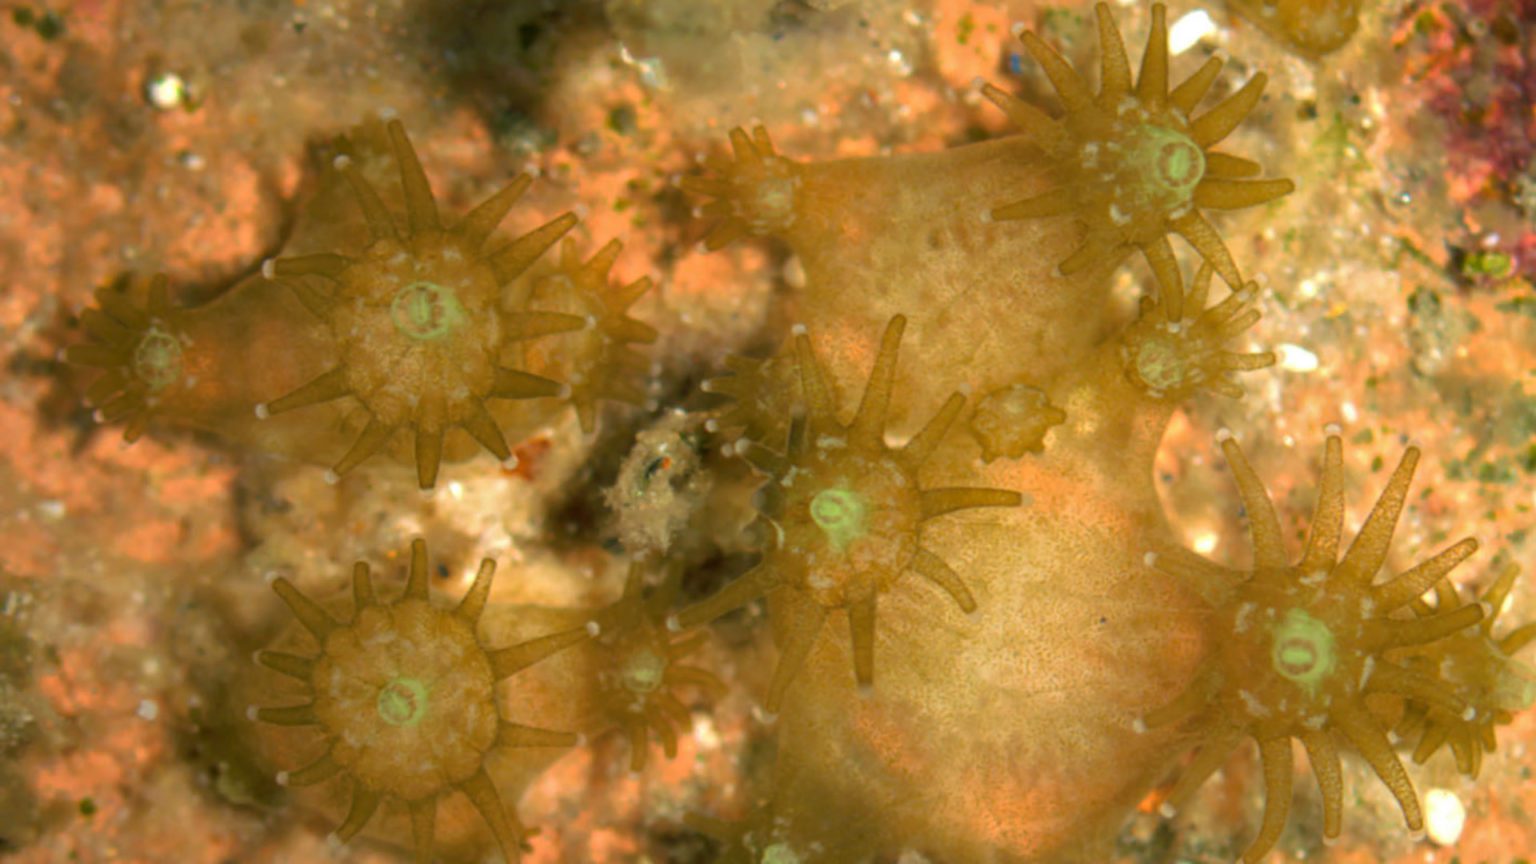 Did you know: How do corals form colonies?